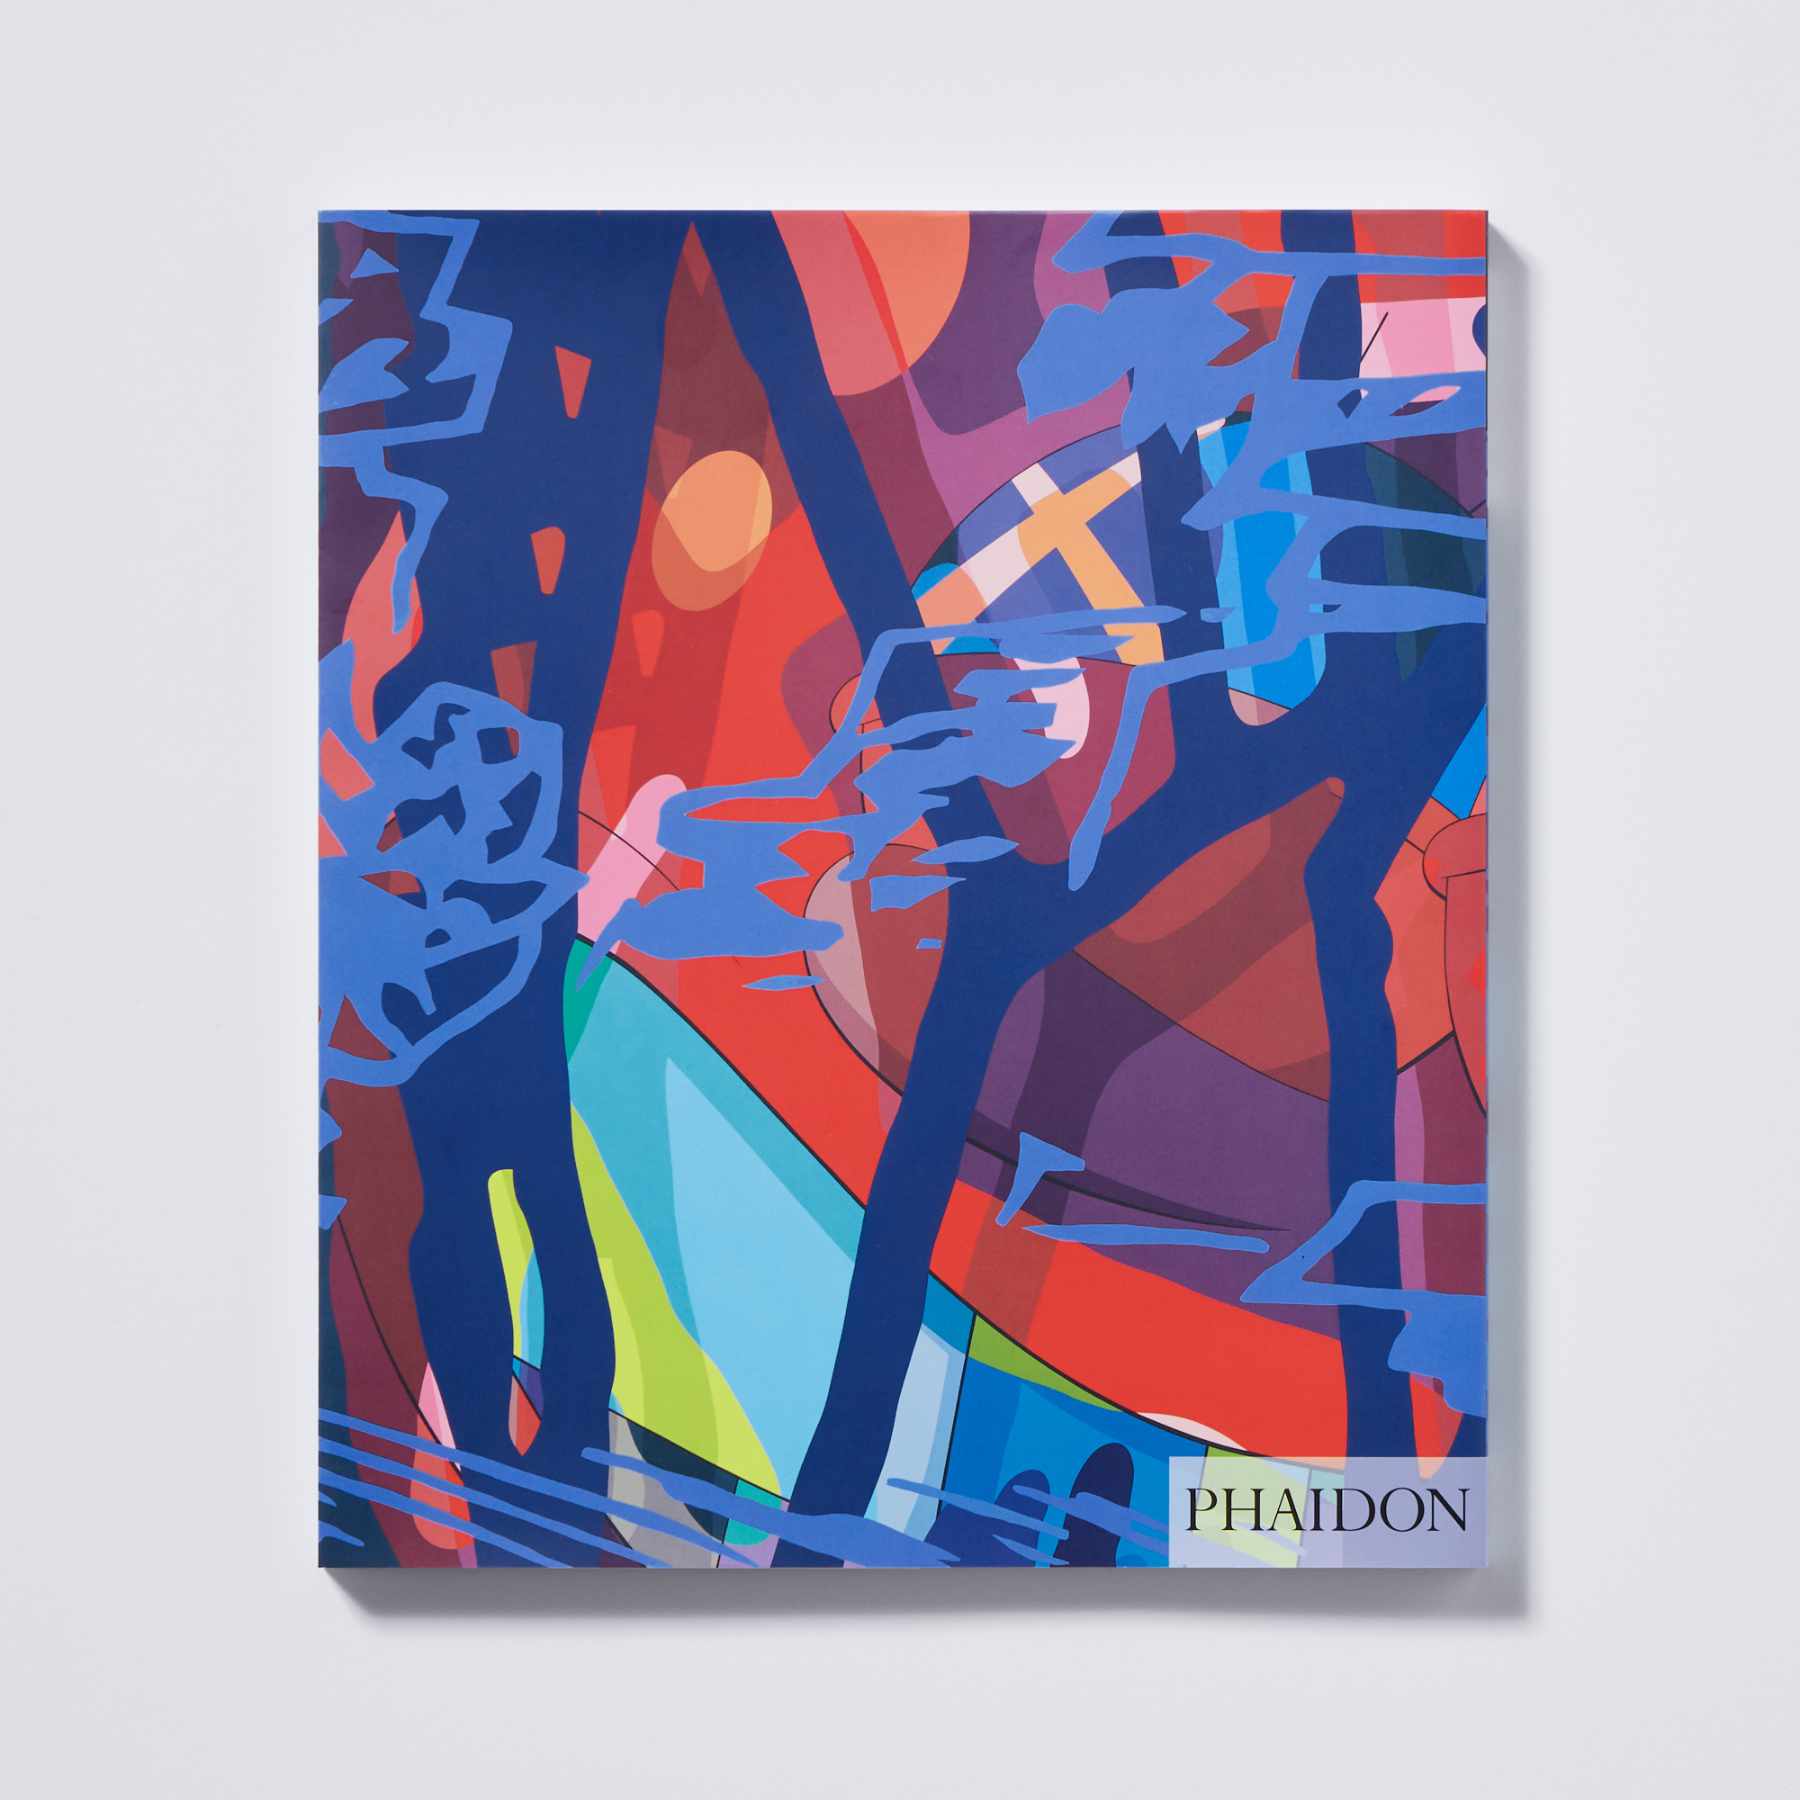 A detailed photograph of the KAWS 'What Party' book published by Phaidon